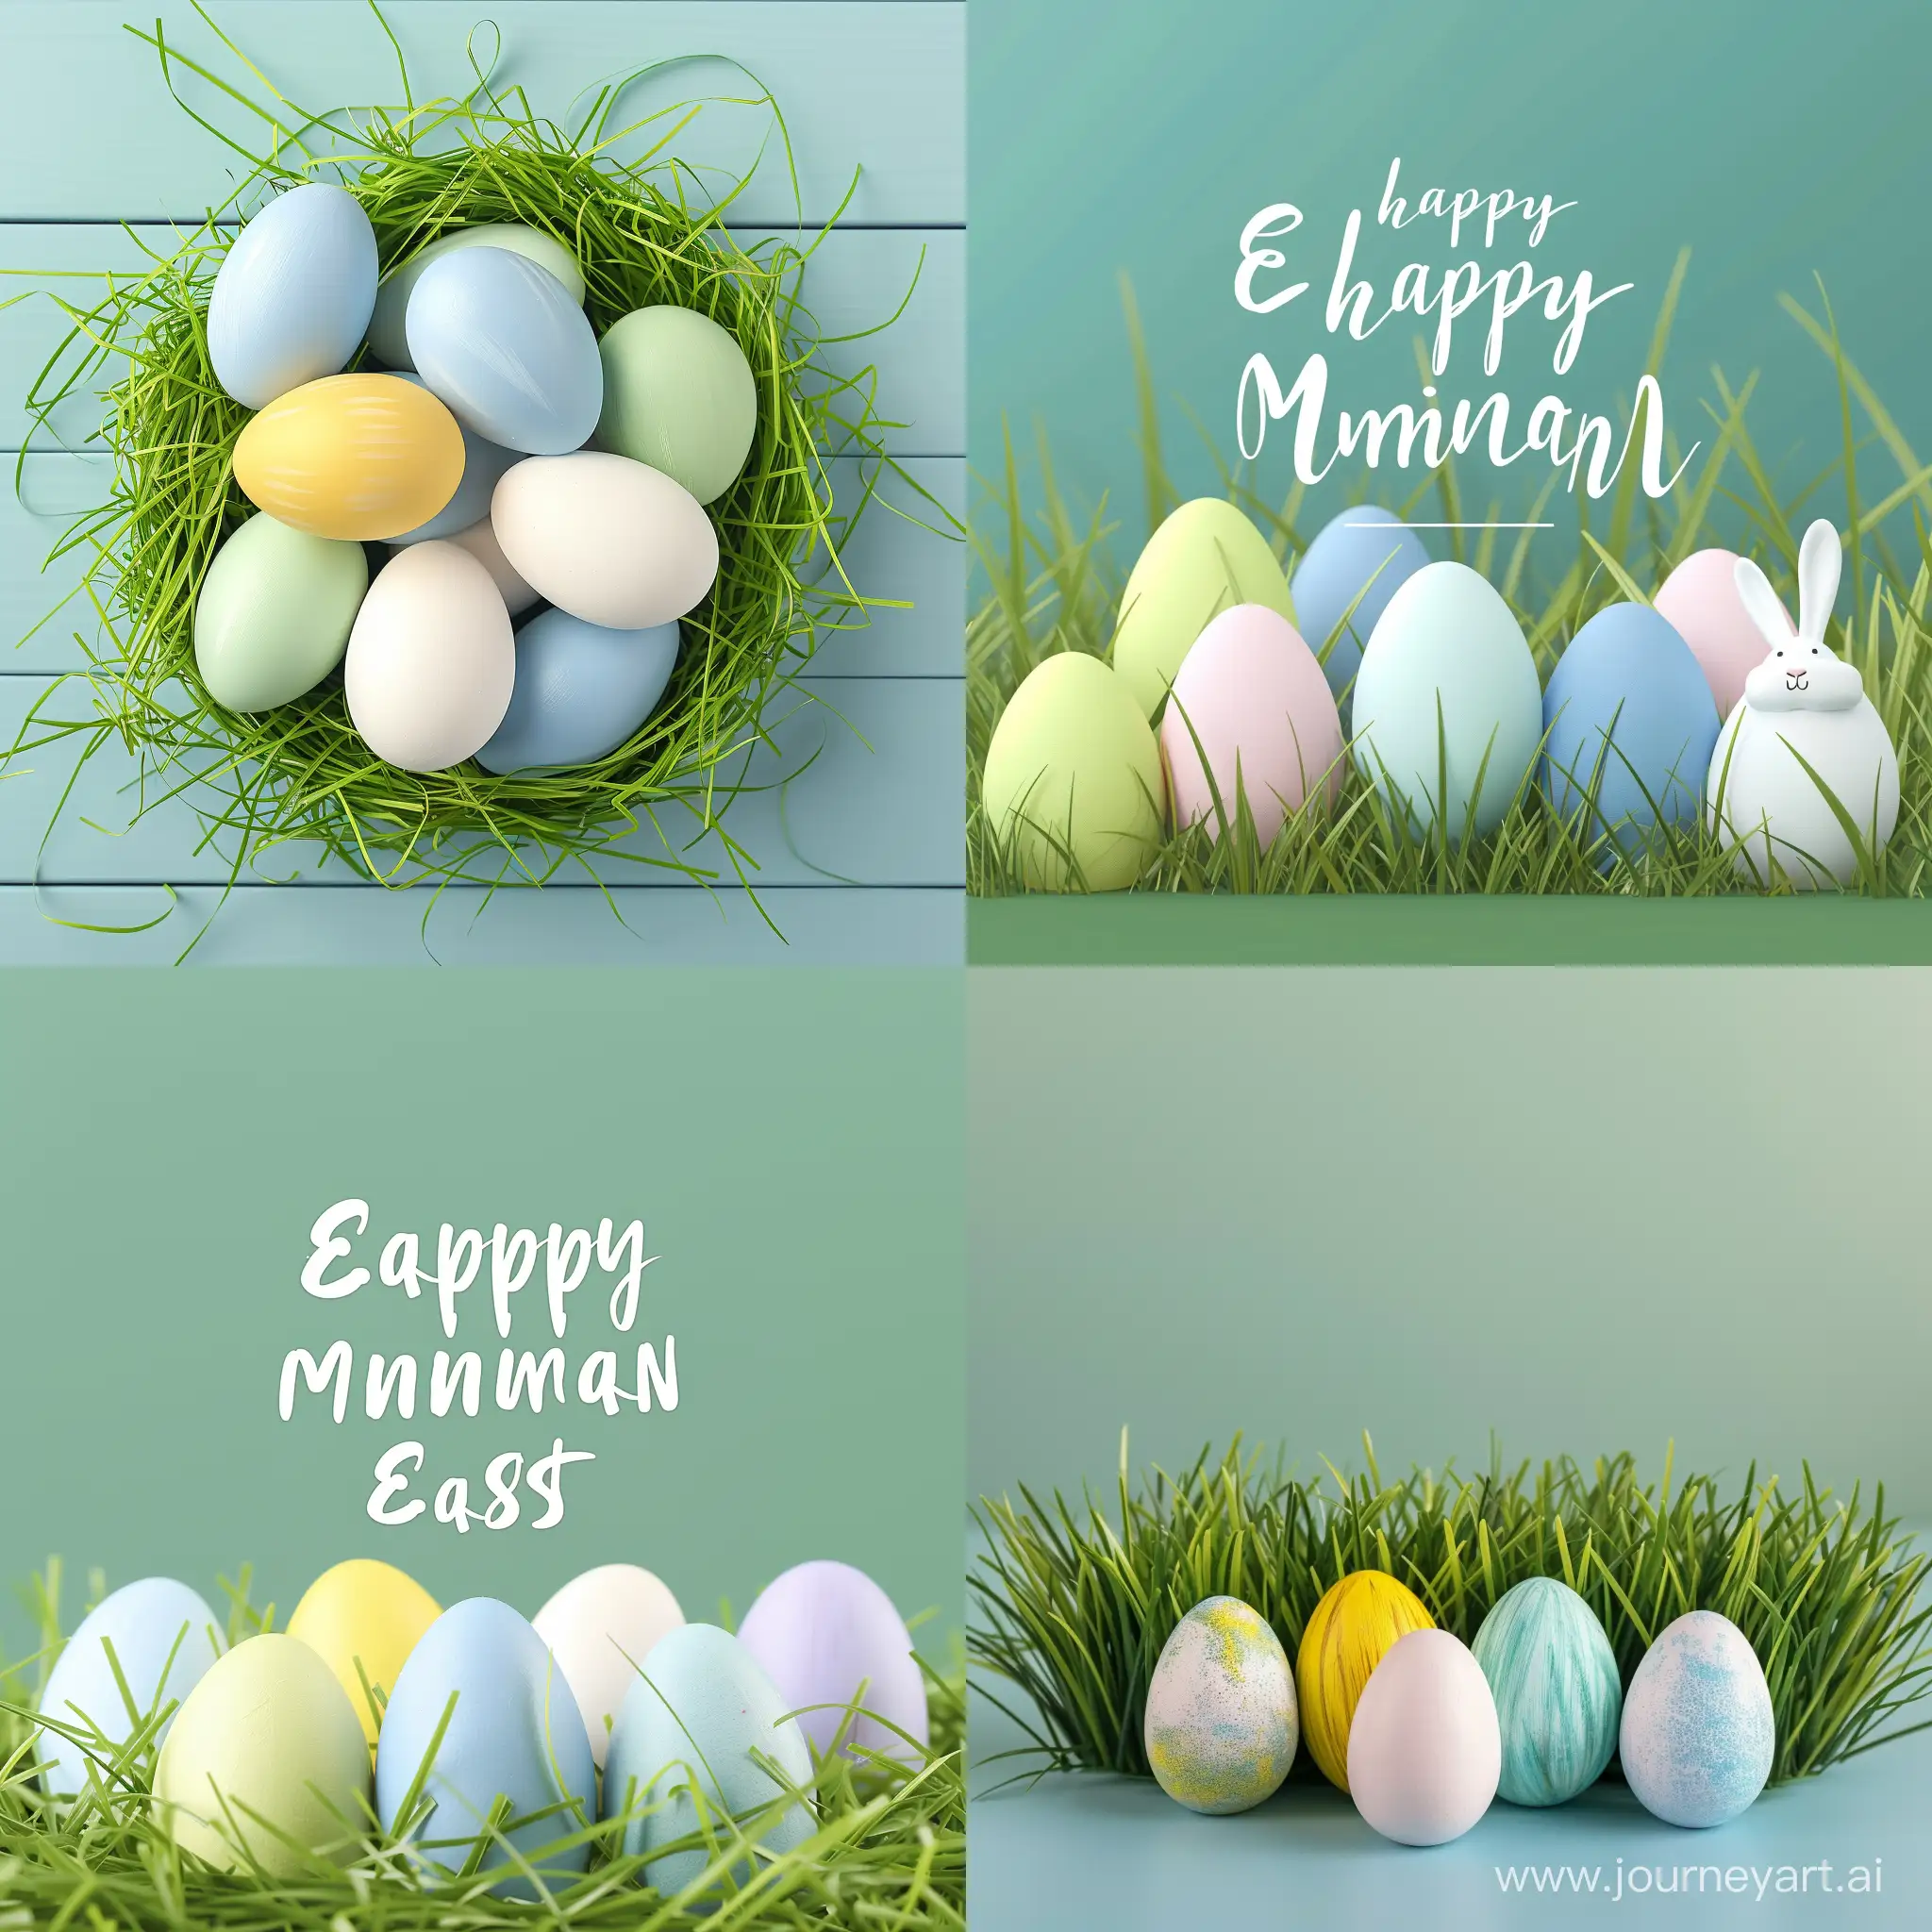 egg, celebration, decoration, holiday, background, easter, happy, spring, tradition, symbol, season, easter monday, festive, greeting, rabbit, fun, white, card, monday, food, traditional, event, religion, color, colorful, green, happy easter, wooden, festival, seasonal, dyed, easter egg, text, object, table, colourful, hunt, joy, postcard, composition, copy space, art, gift, illustration, painted, set, april, blue, boiled, creative A serene Easter Monday morning, capturing the peaceful ambiance of spring with pastel-colored Easter eggs nestled in soft grass, symbolizing renewal and hope, in flat style